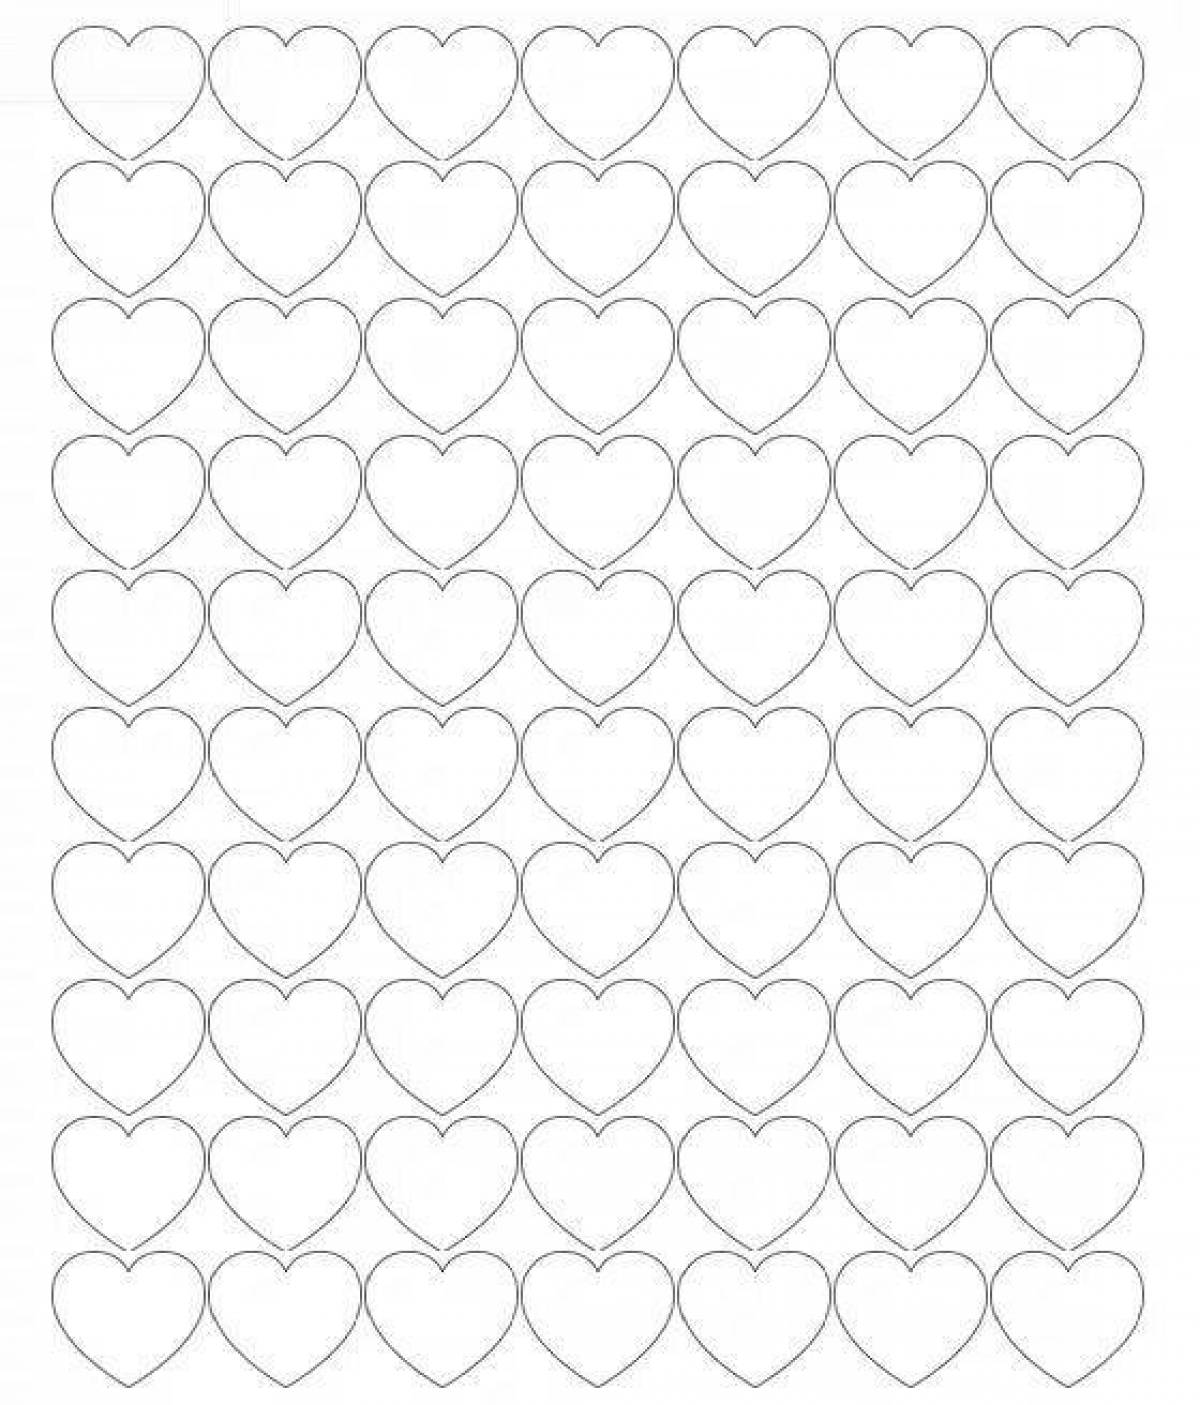 A strikingly beautiful coloring page with lots of hearts